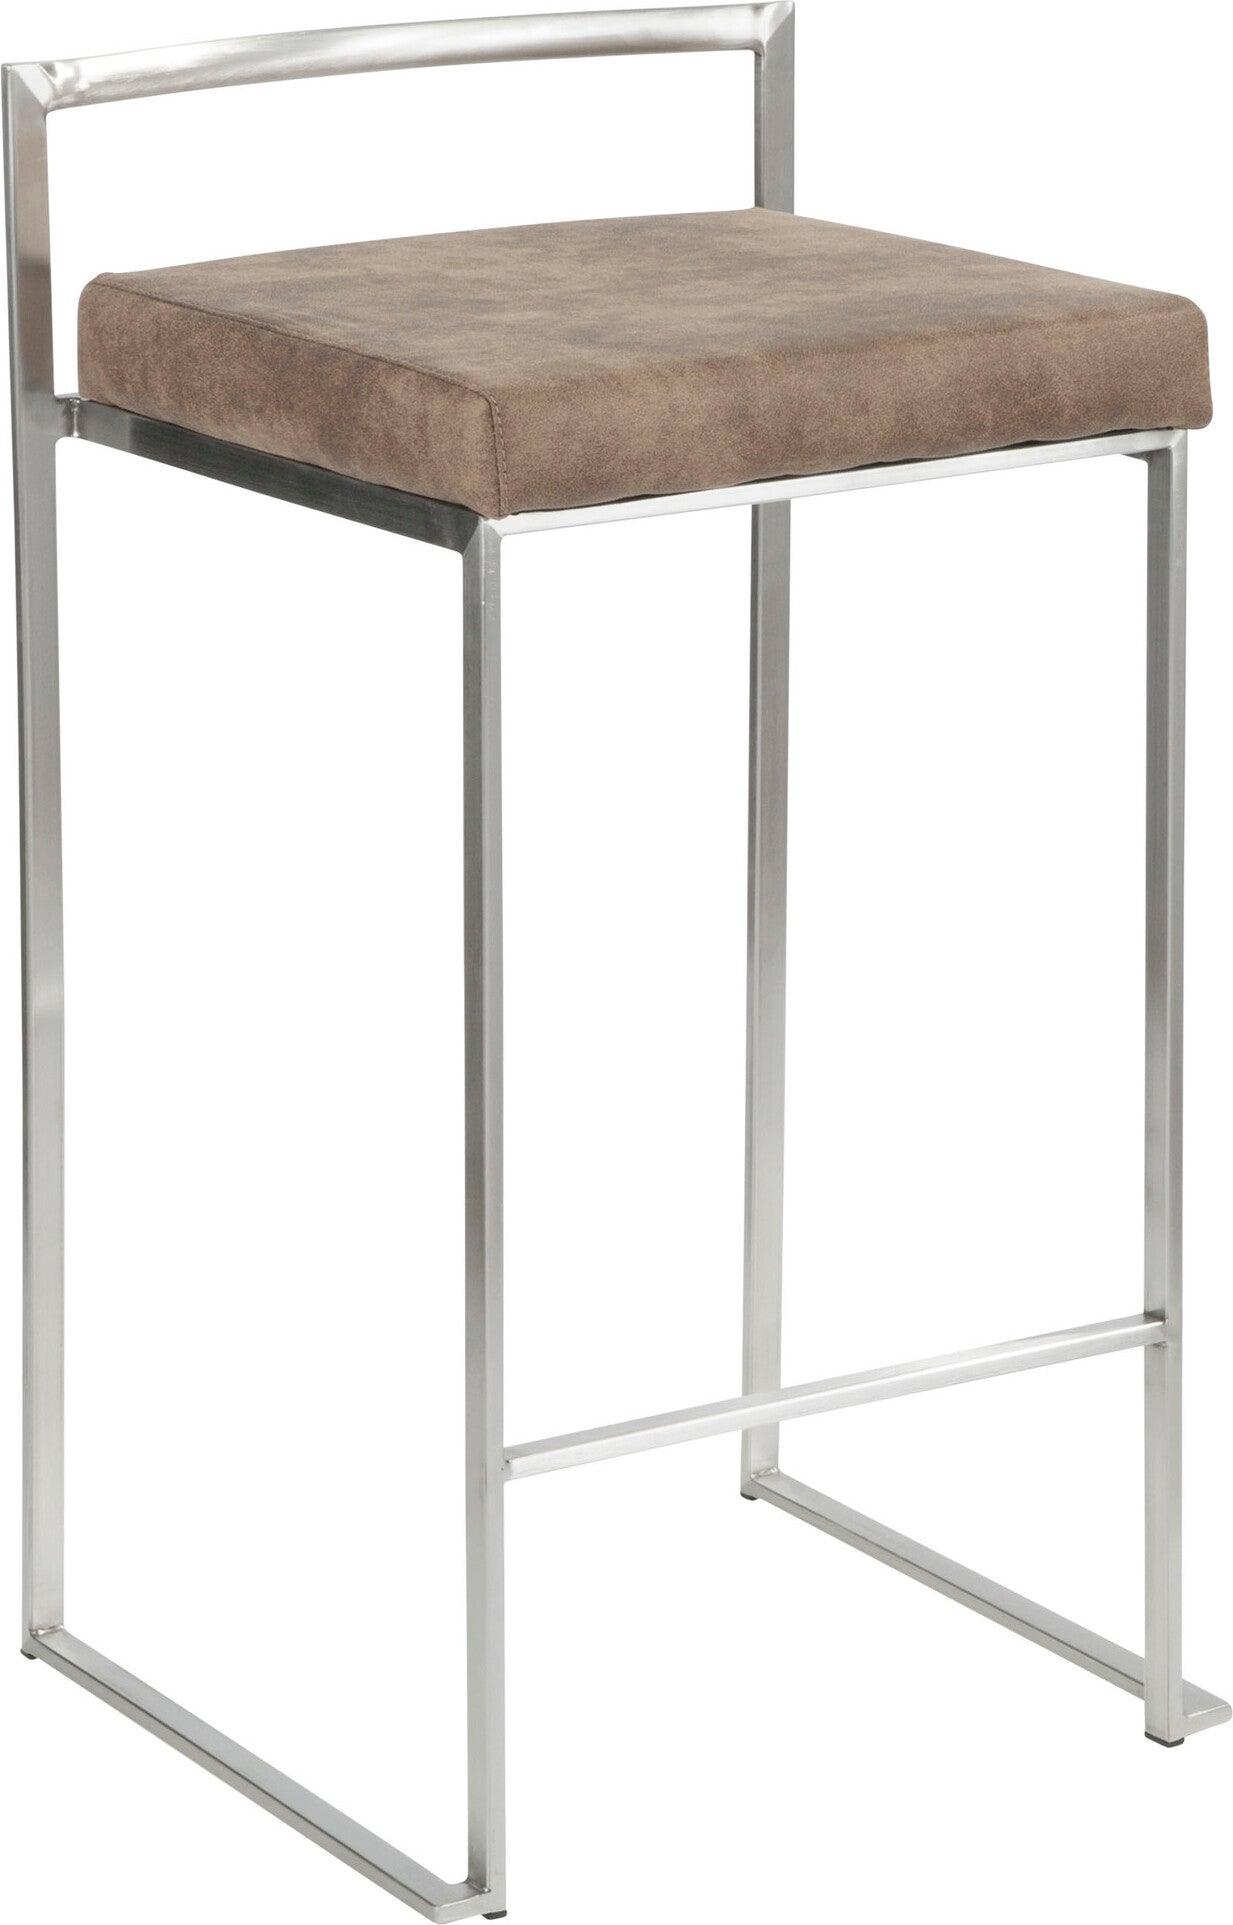 Lumisource Barstools - Fuji Stacker Counter Stool (Set of 2) Stainless Steel & Brown Cowboy